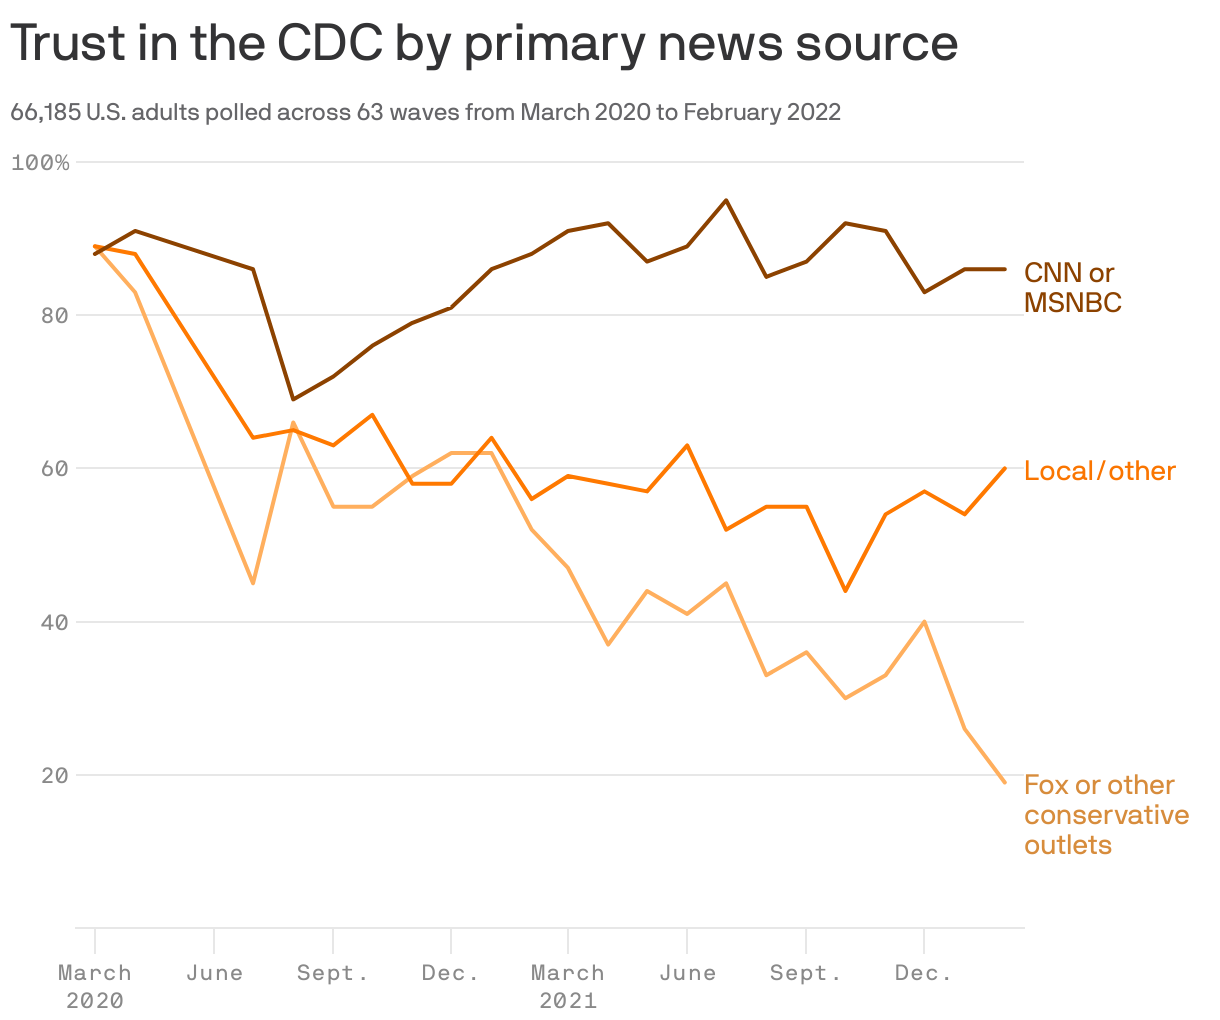 Trust in the CDC by primary news source